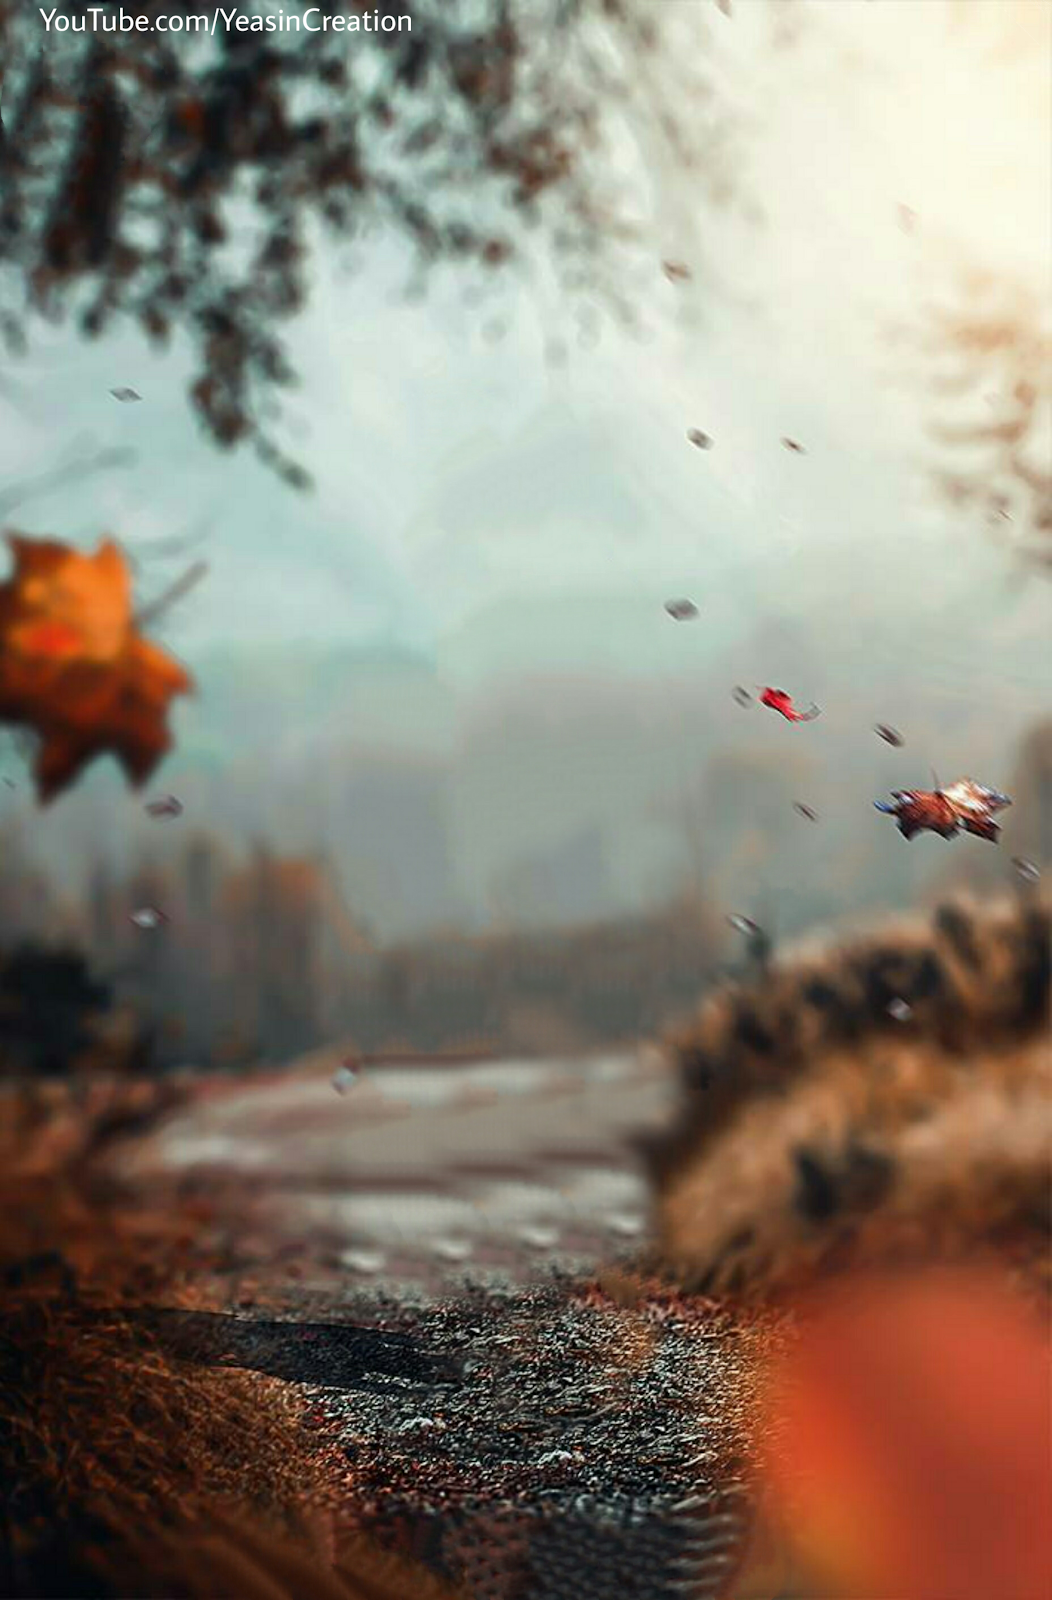 Top Awesome Manipulation HD Background By Yeasin